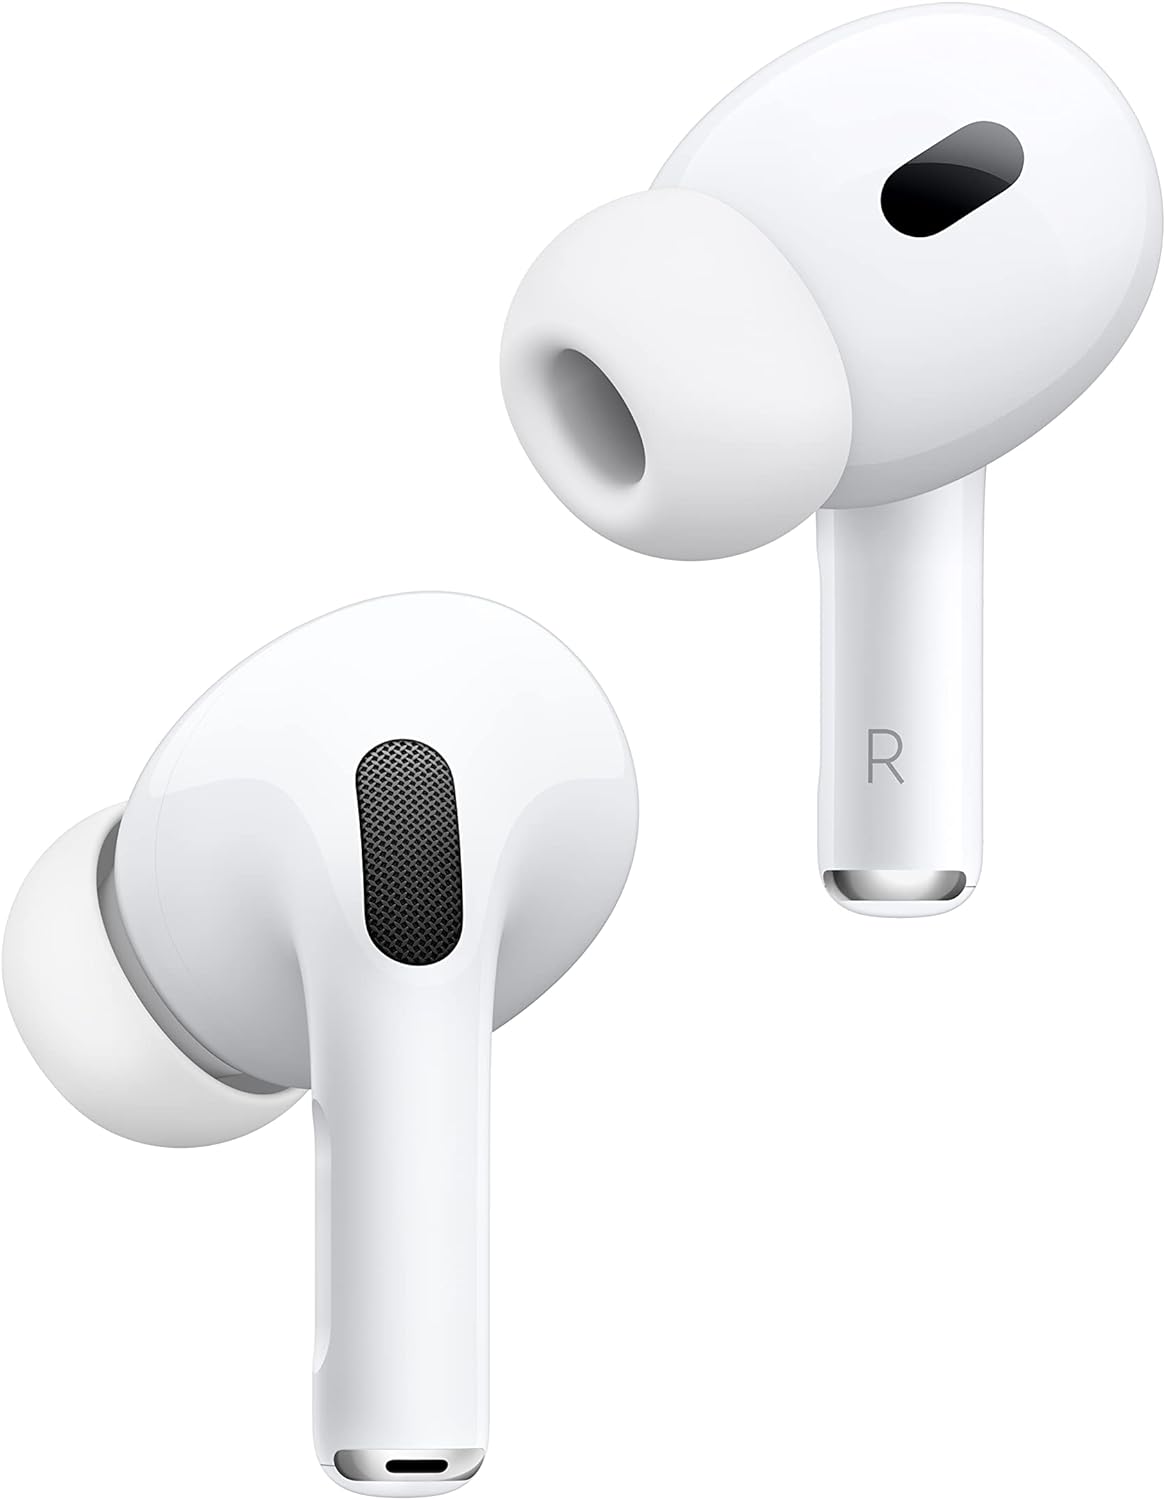 Apple AirPods Pro (2nd Generation): Save $50!